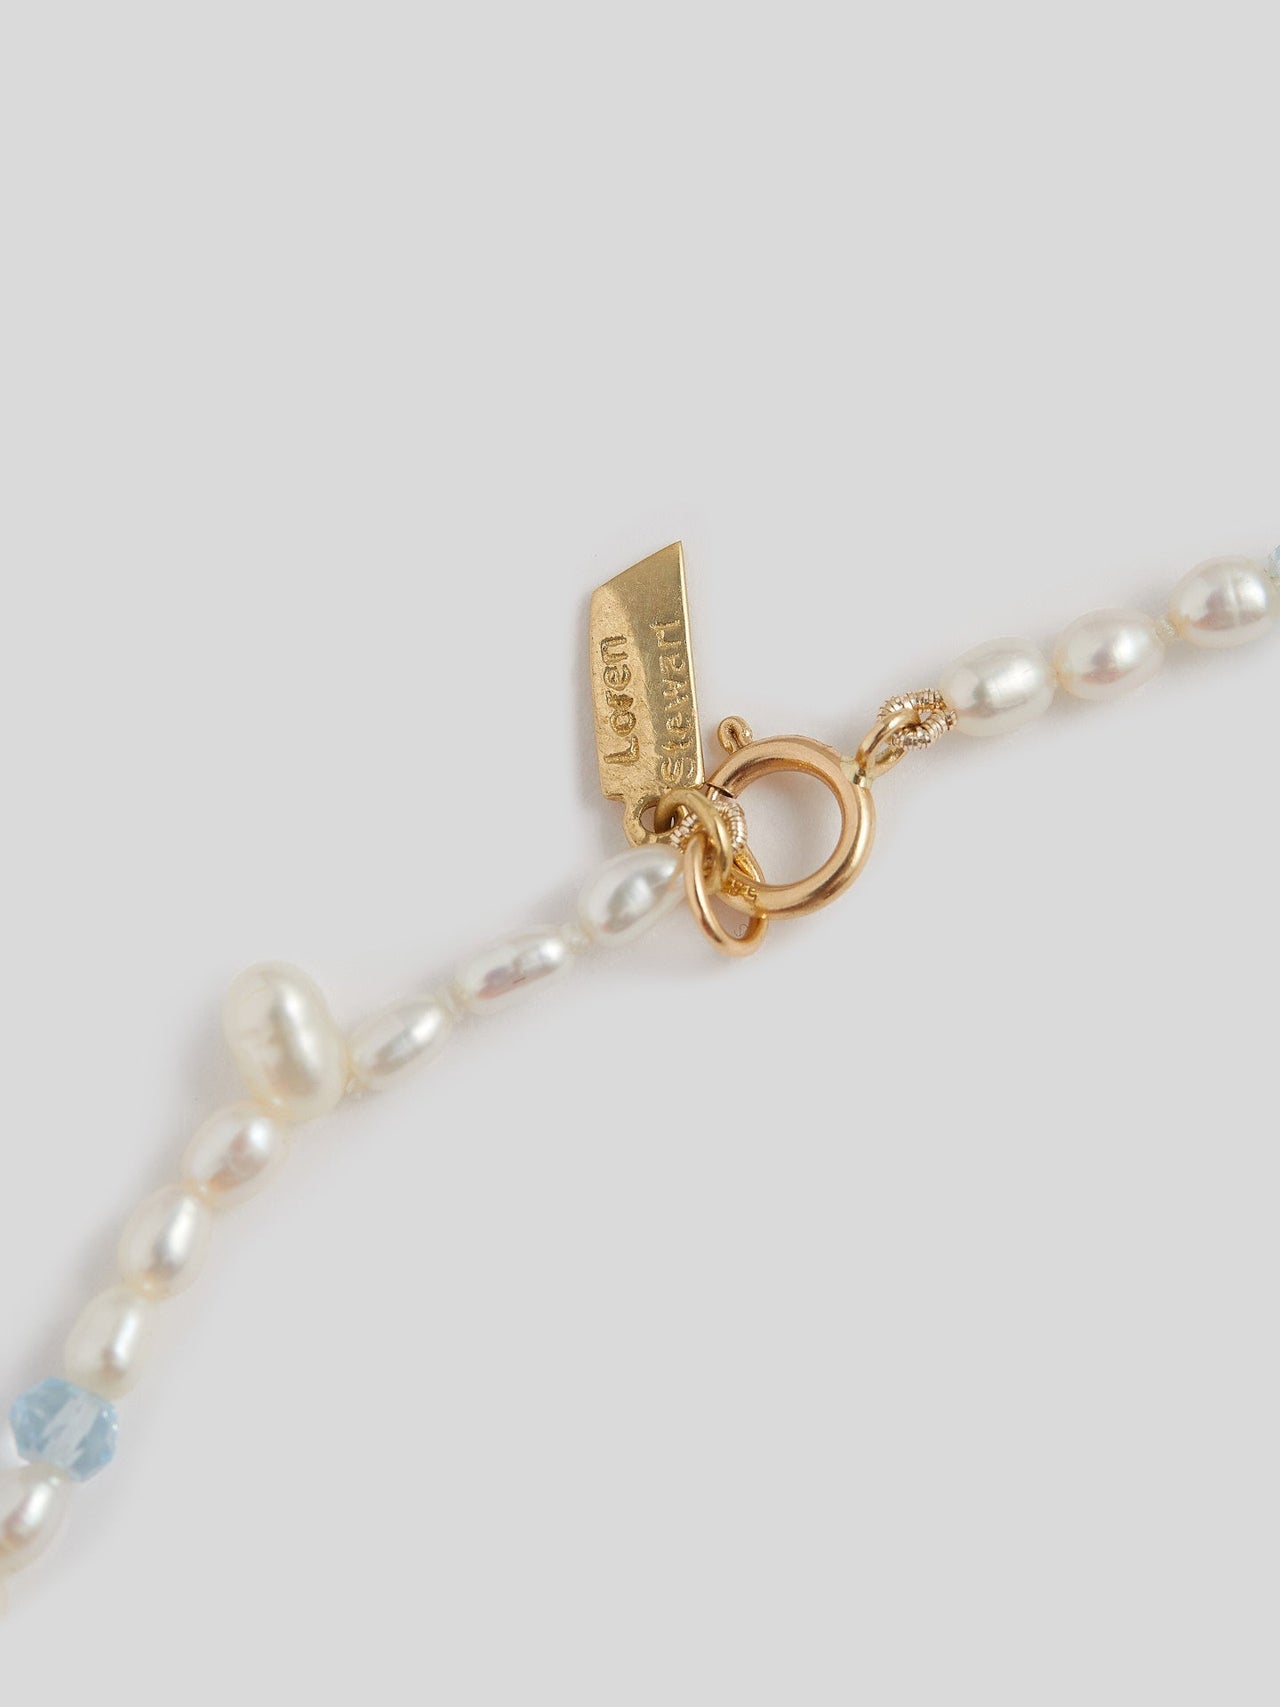  Assorted Freshwater Pearls & Gemstone Necklace close up of 14kt yellow gold closure and logo. 